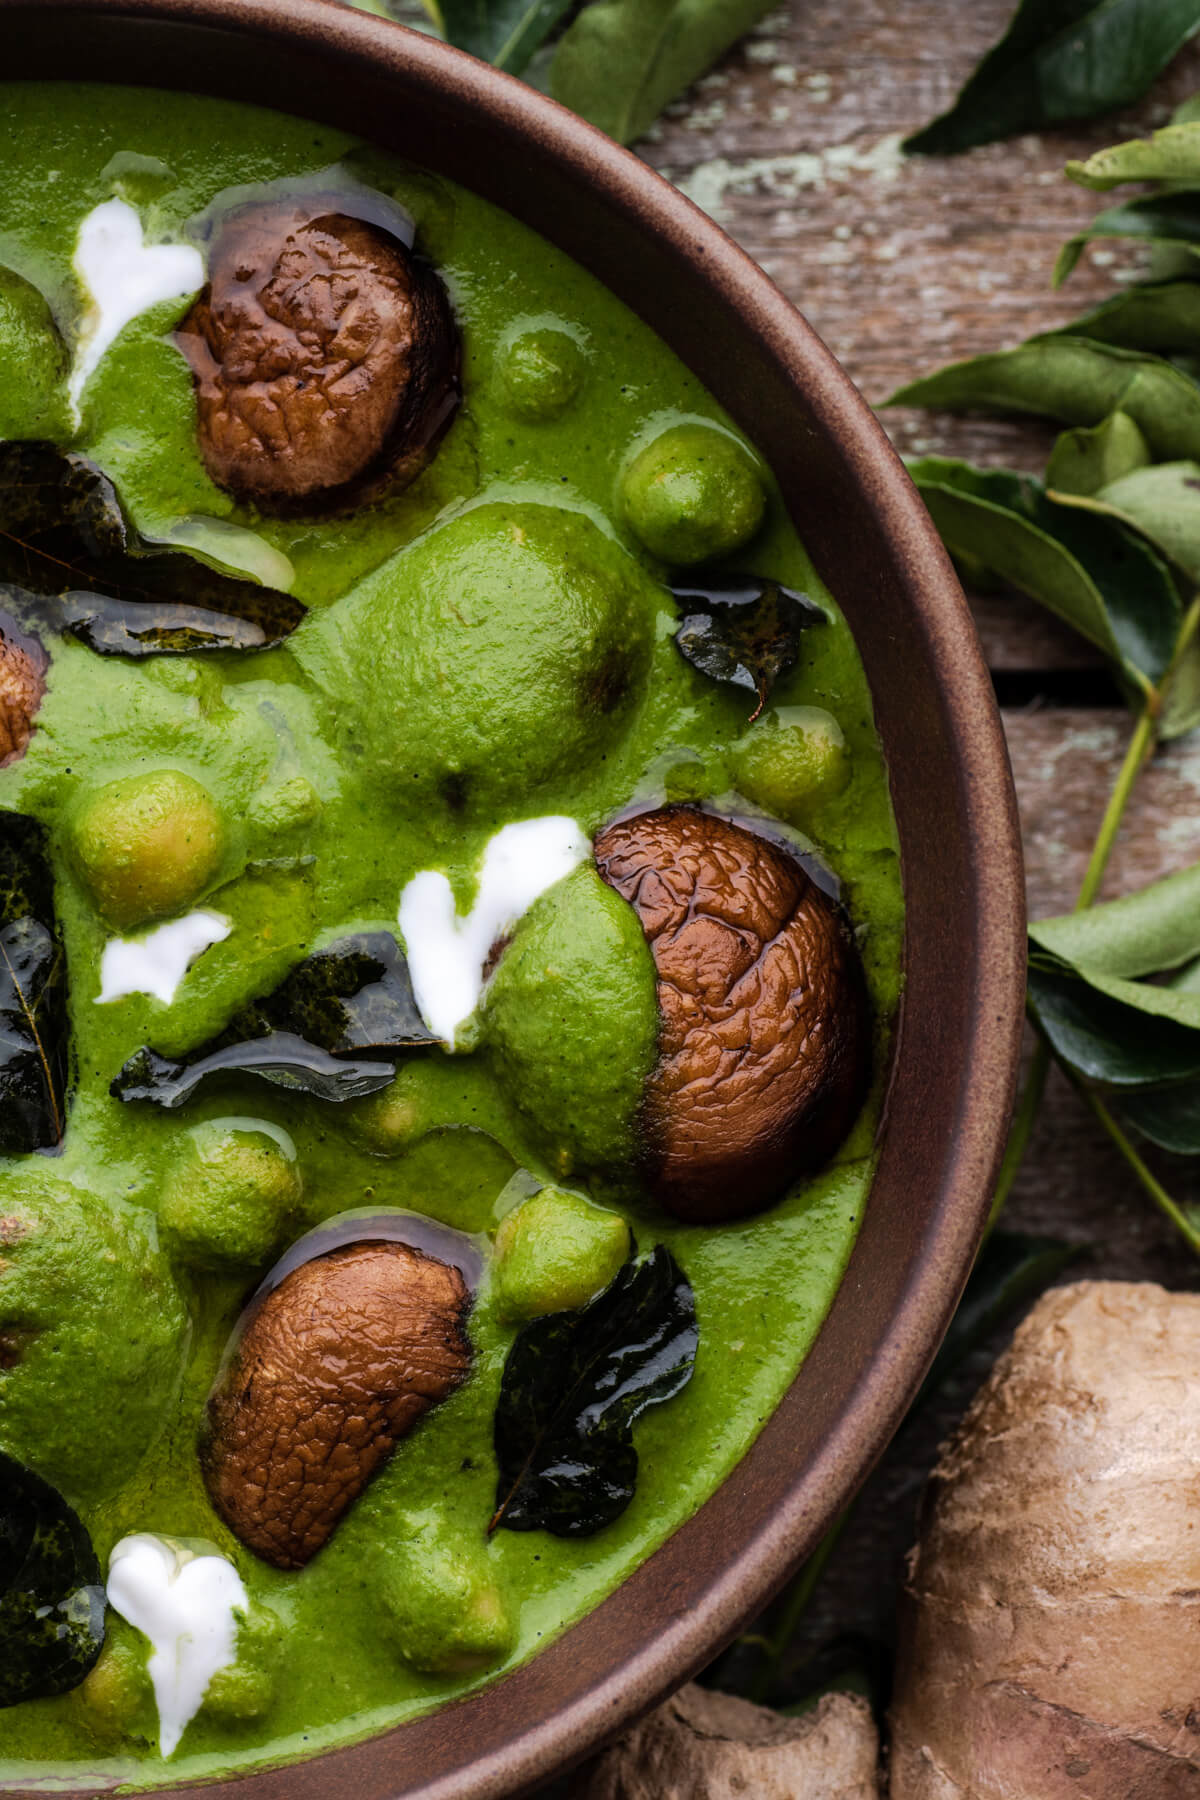 A vibrant green spinach curry with mushrooms, chickpeas, fried curry leaves, and drizzles of coconut cream in a brown bowl.